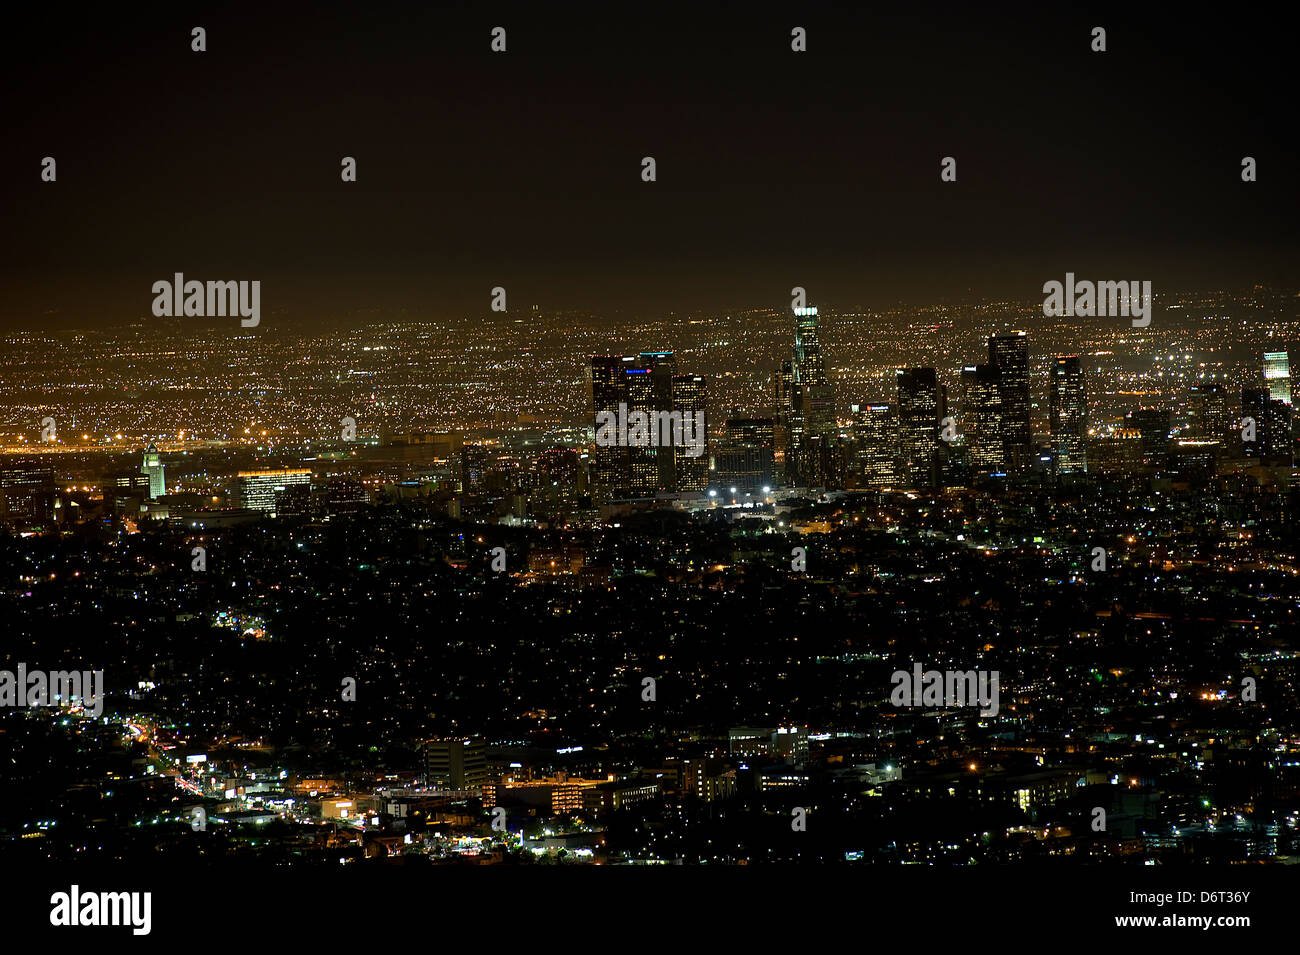 Los Angeles, California, April 11 2013: a night time view of Los Angeles in the direction of the Downtown area. Stock Photo